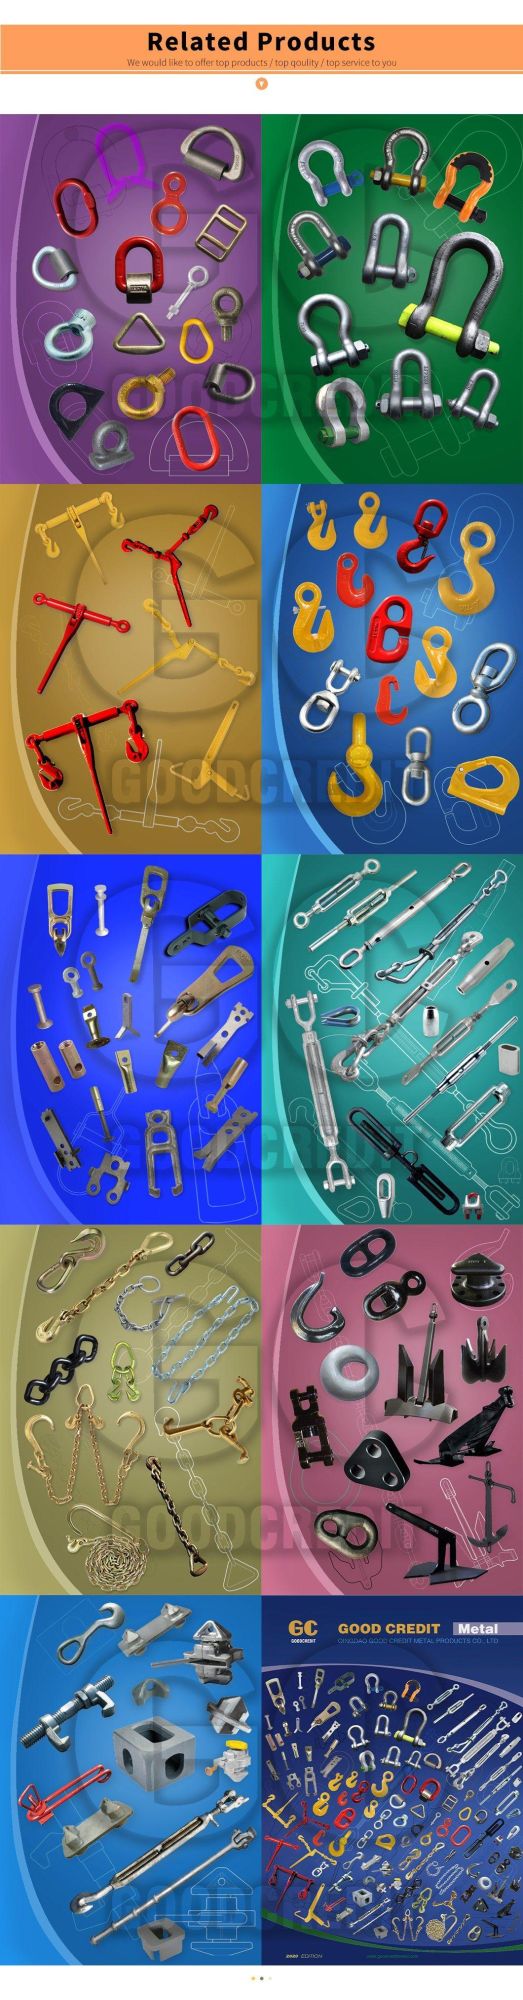 Steel or AISI304/316 of JIS Wire Rope Clips with High Quality